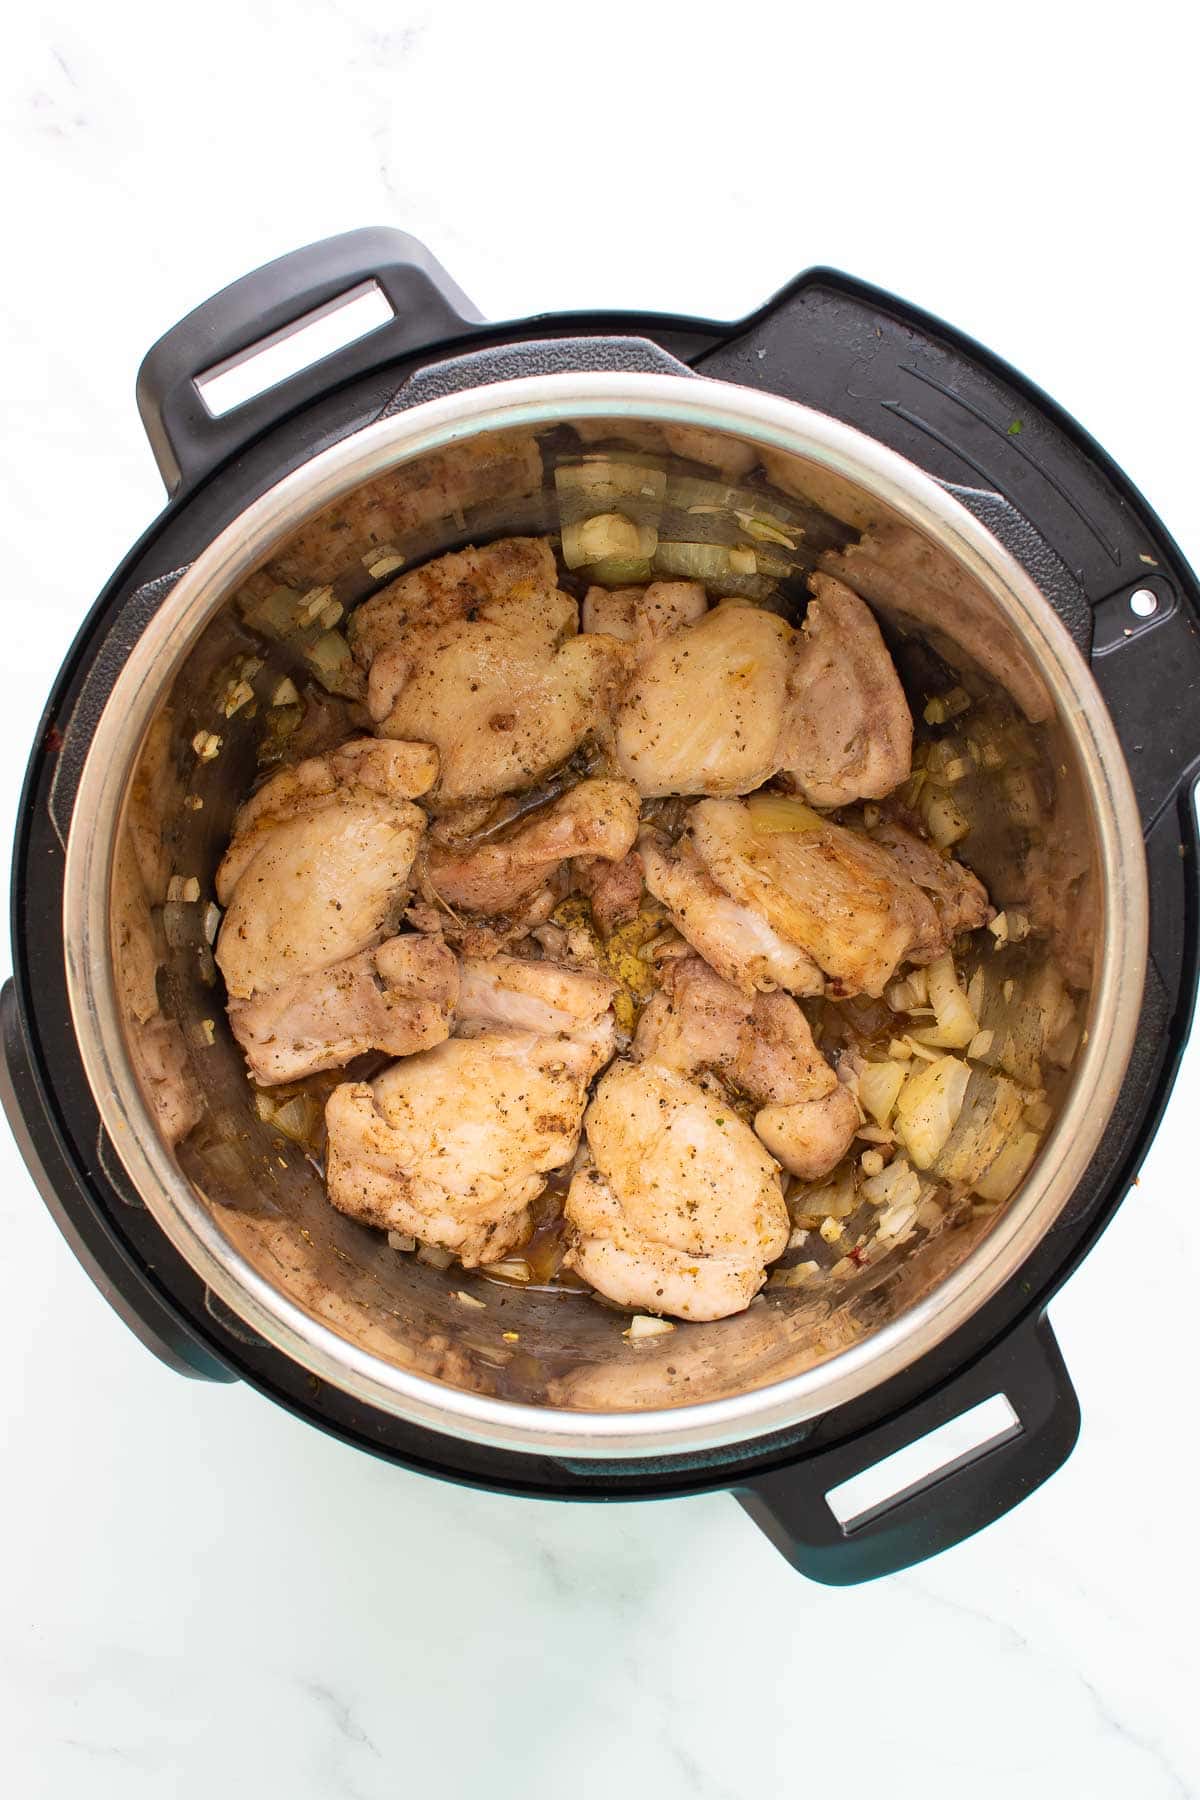 Garlic, onion and chicken thighs in an Instant Pot.